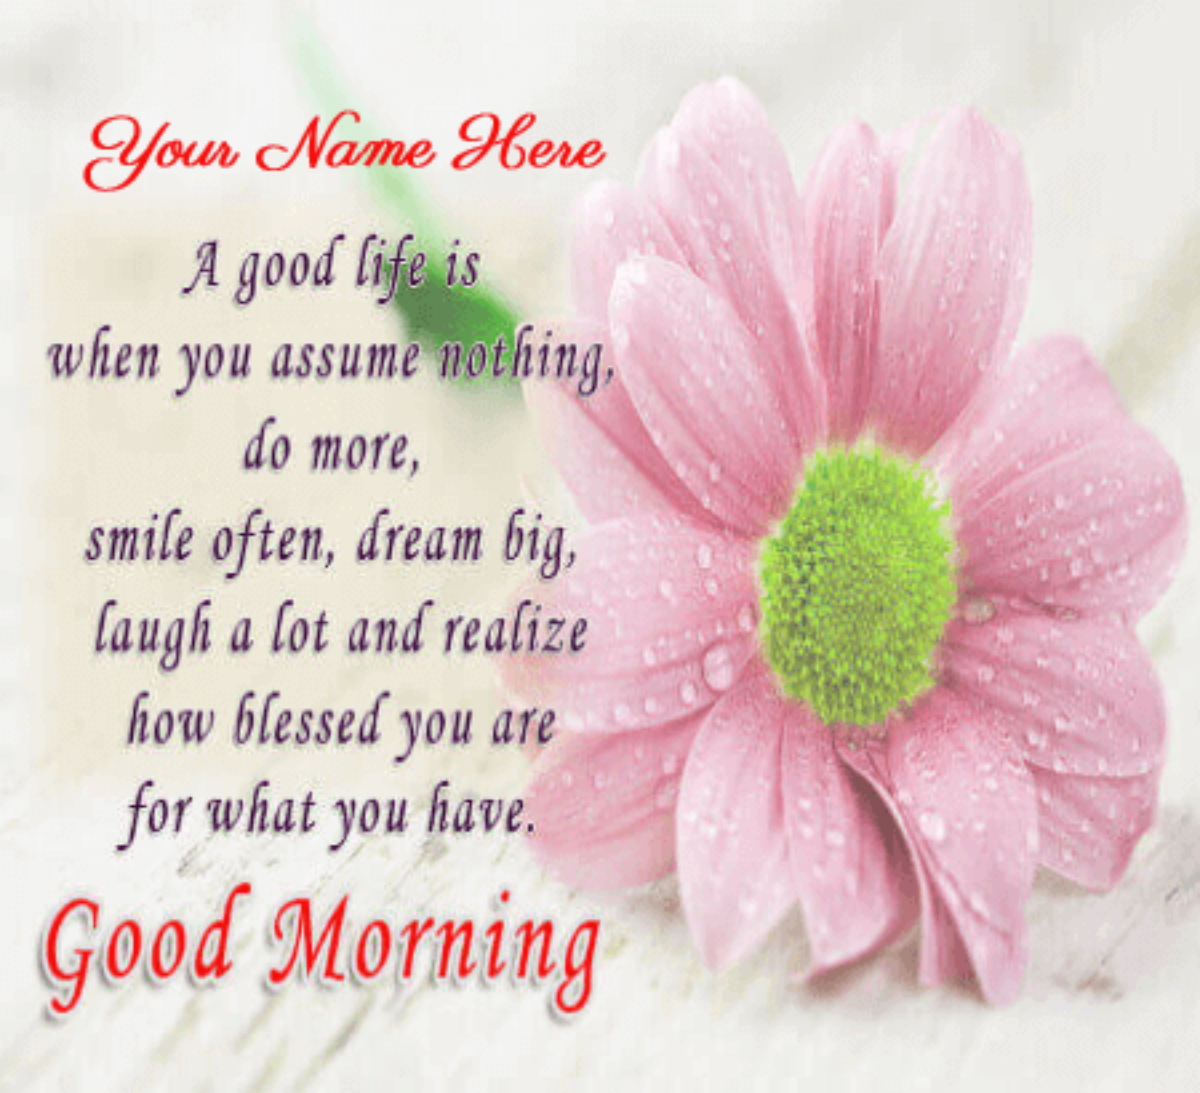 Good Morning Quotes for Cousins - Good Morning Wishes With Name